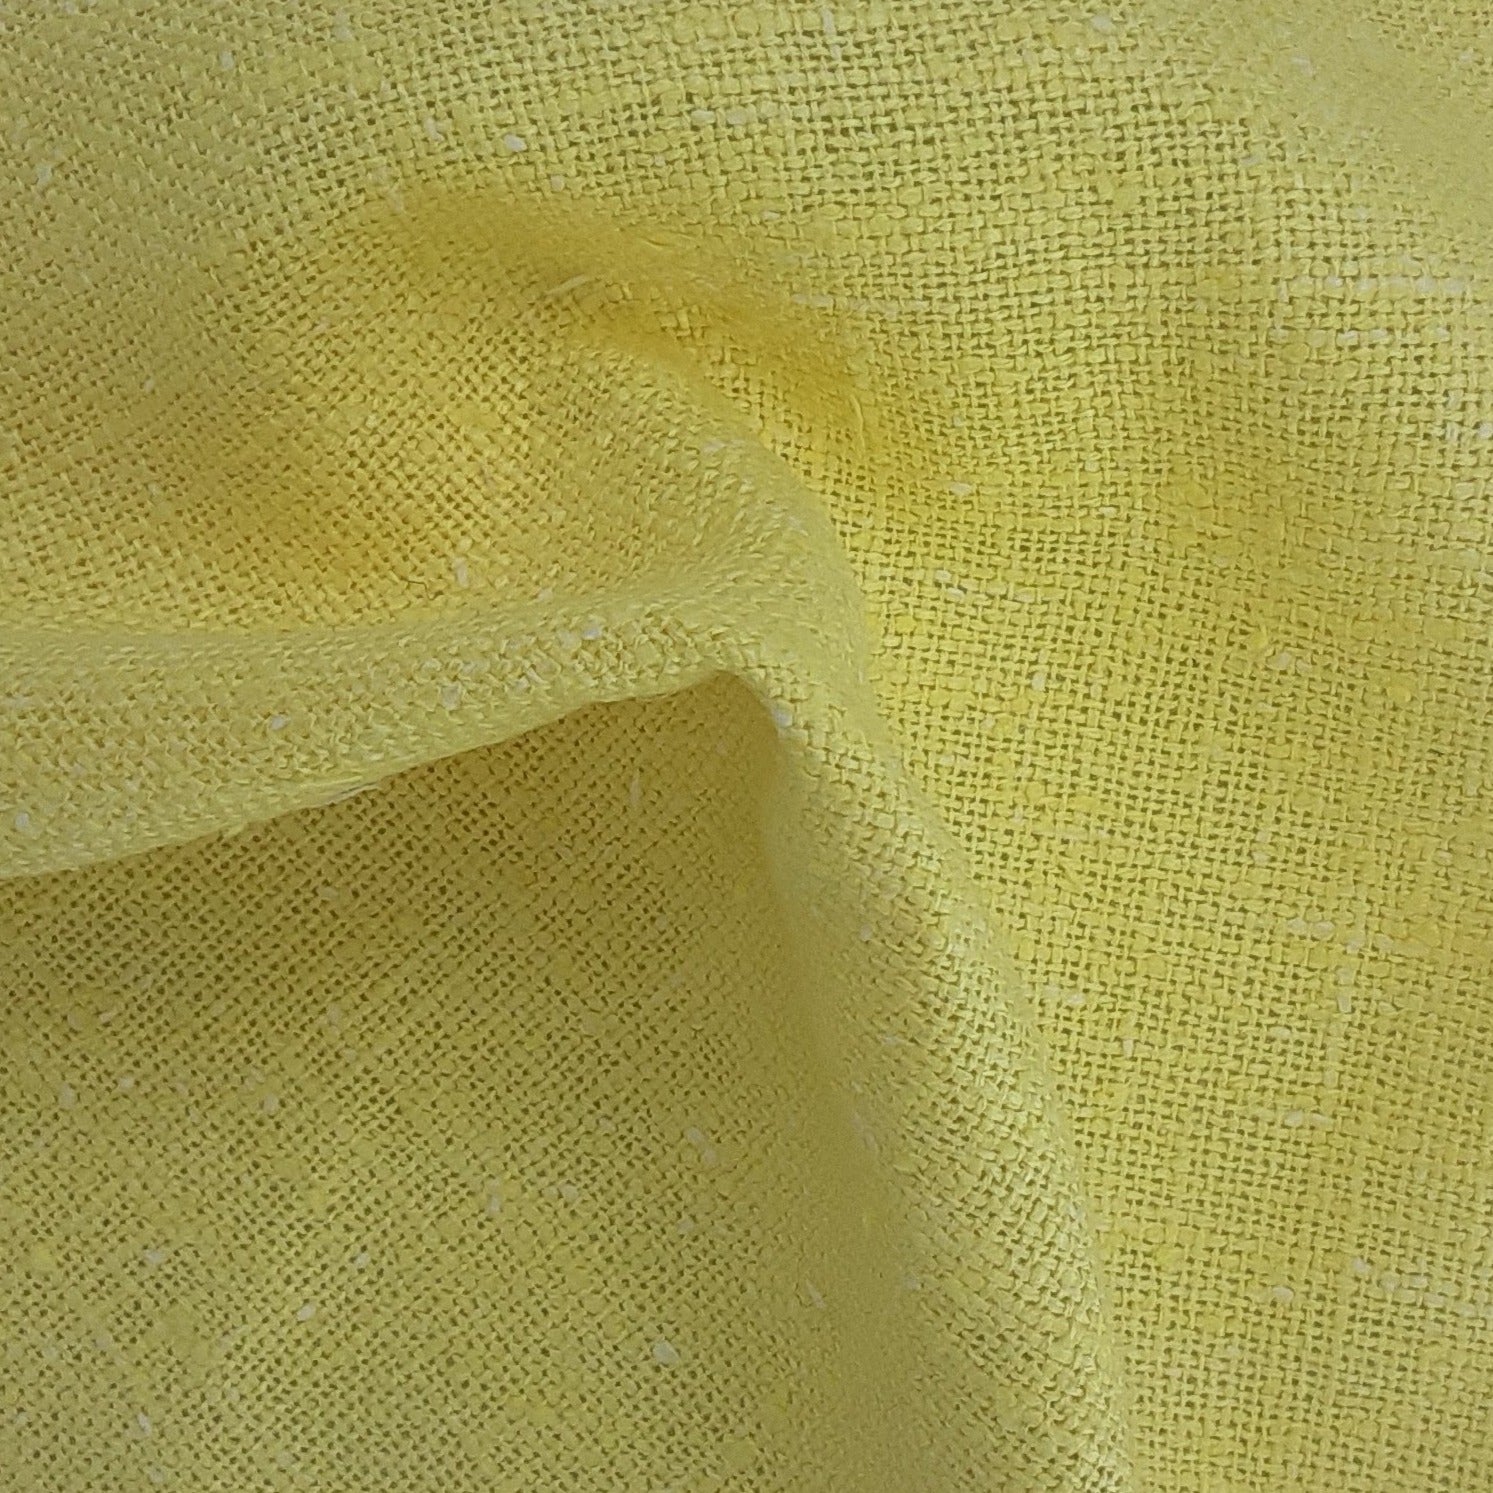 Yellow #S153 Hopsack Suiting 10 Ounce Woven Fabric - SKU 6659